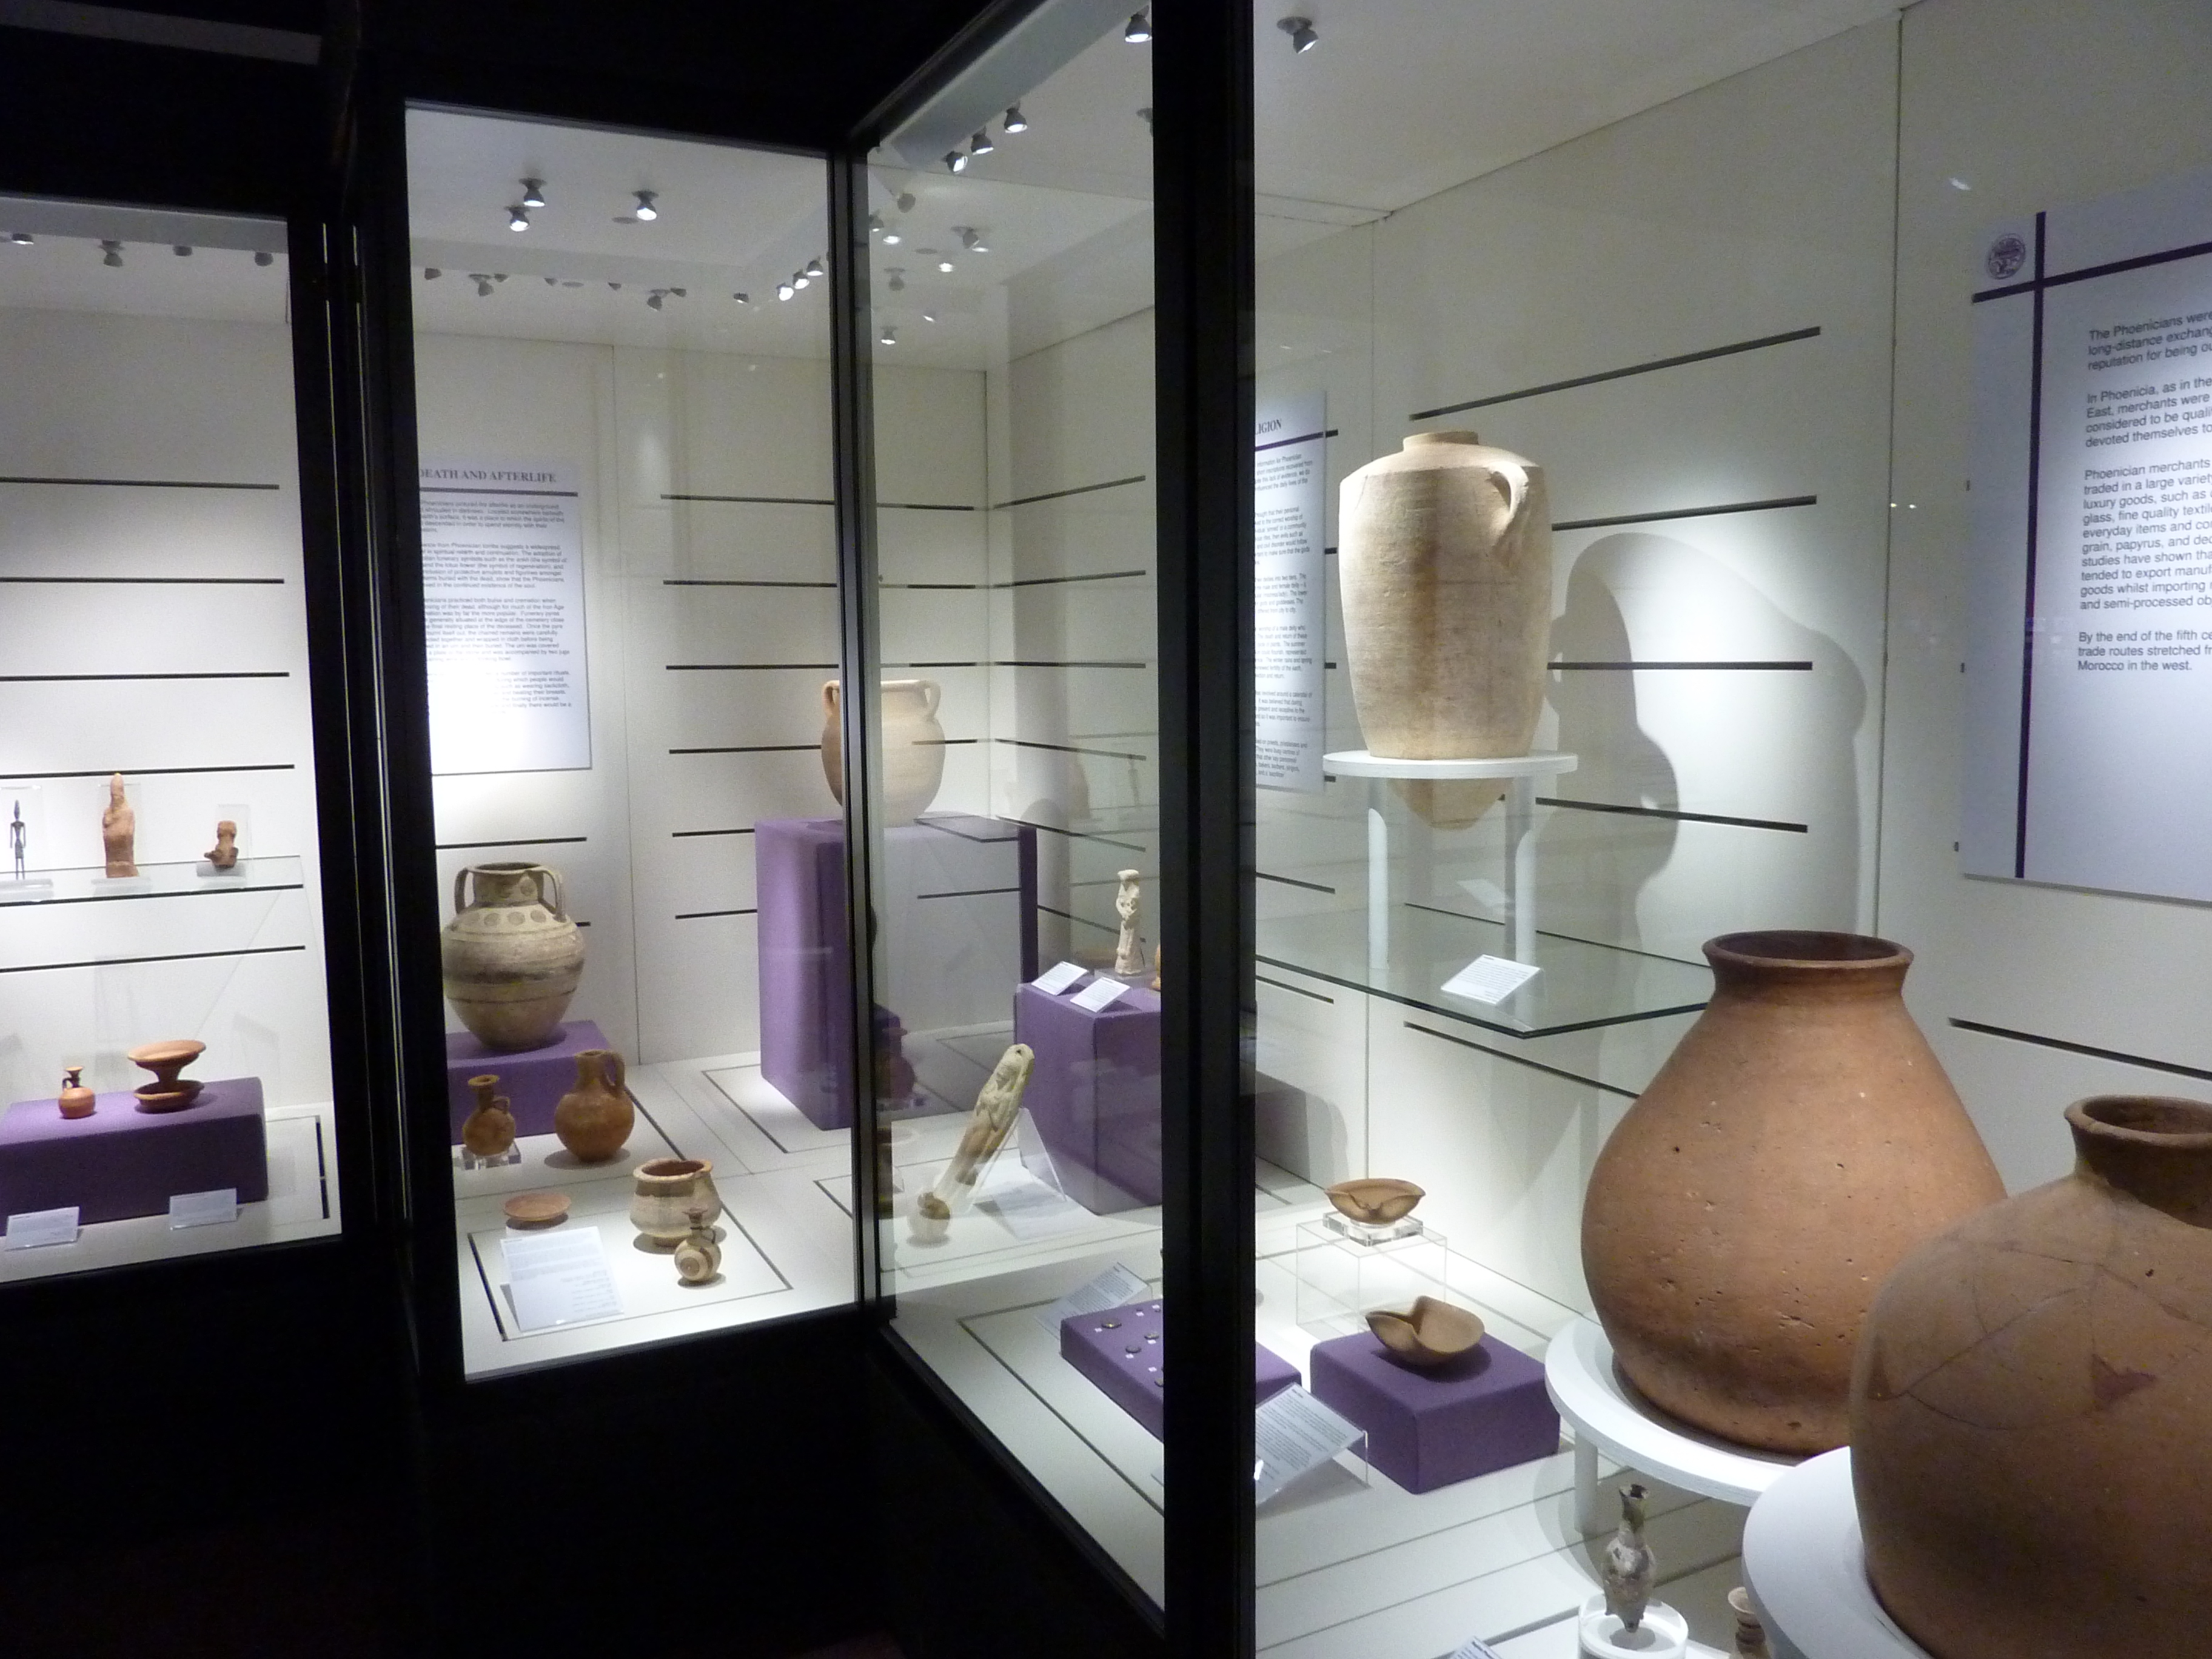 Museum display cases with a range of ancient pottery vessels, small pottery figures and coins at different heights on plinths